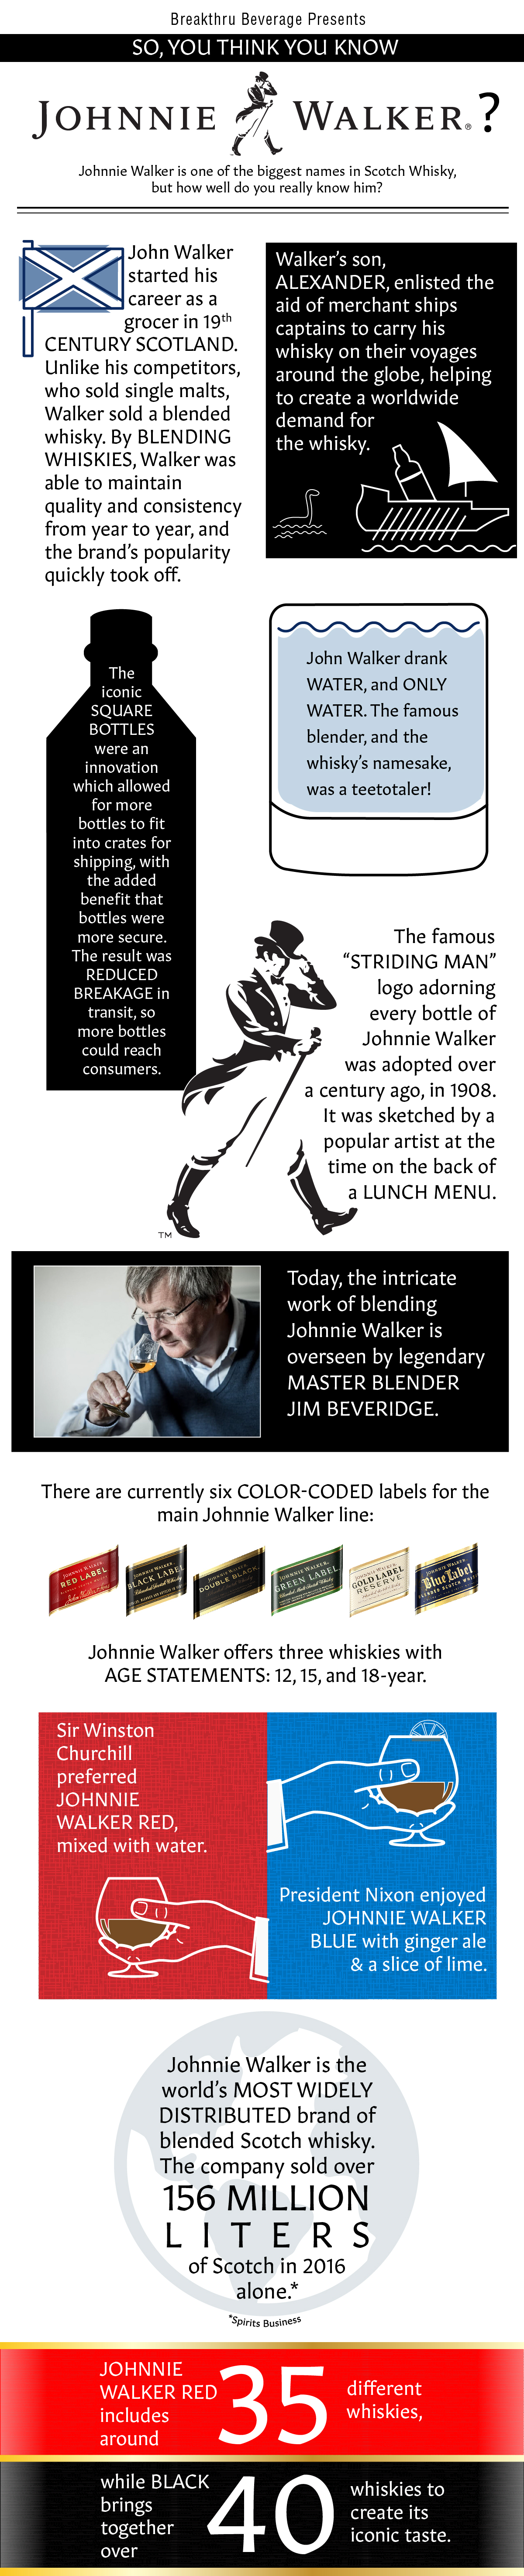 So, You Think You Know Johnnie Walker?